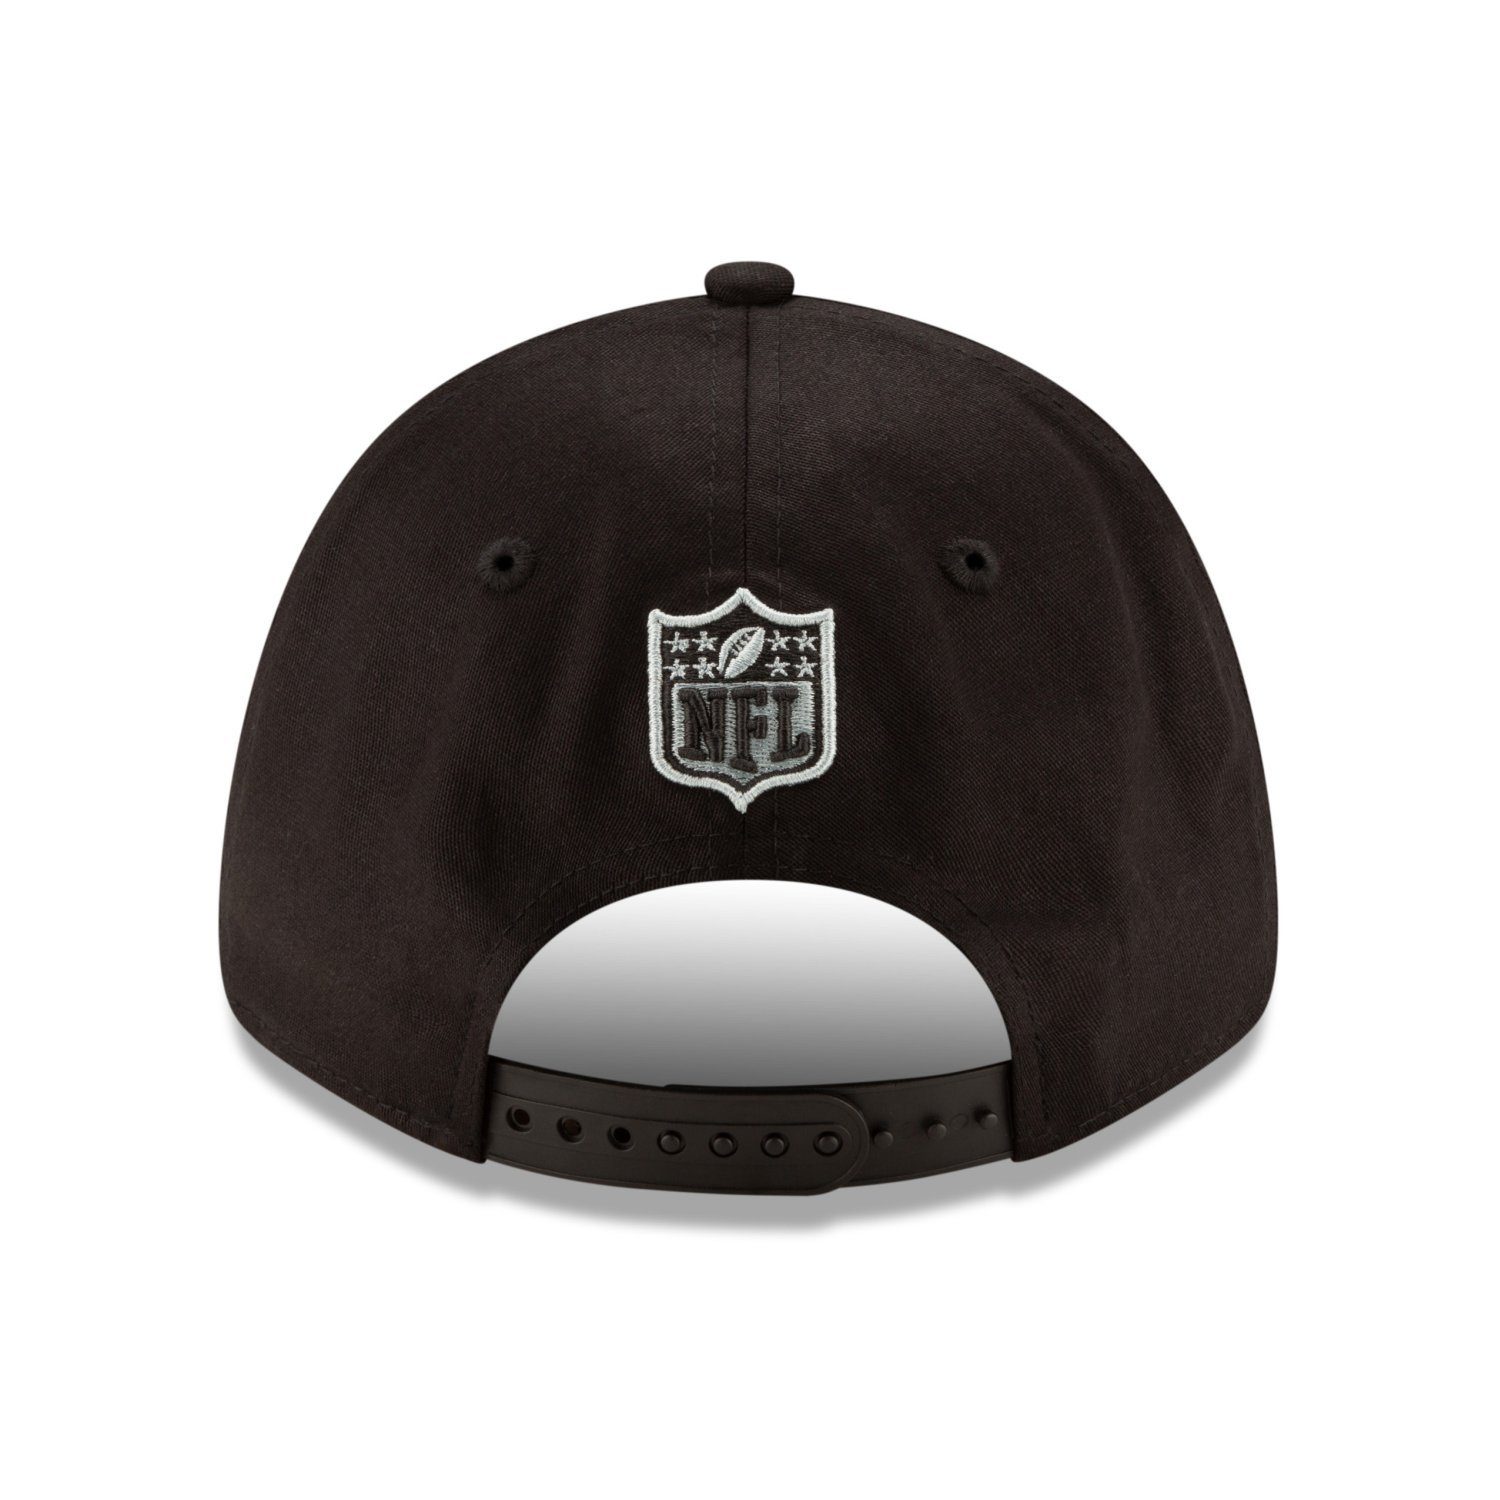 Raiders Stretch Era Cap Fitted 2020 9FORTY Vegas DRAFT Las New